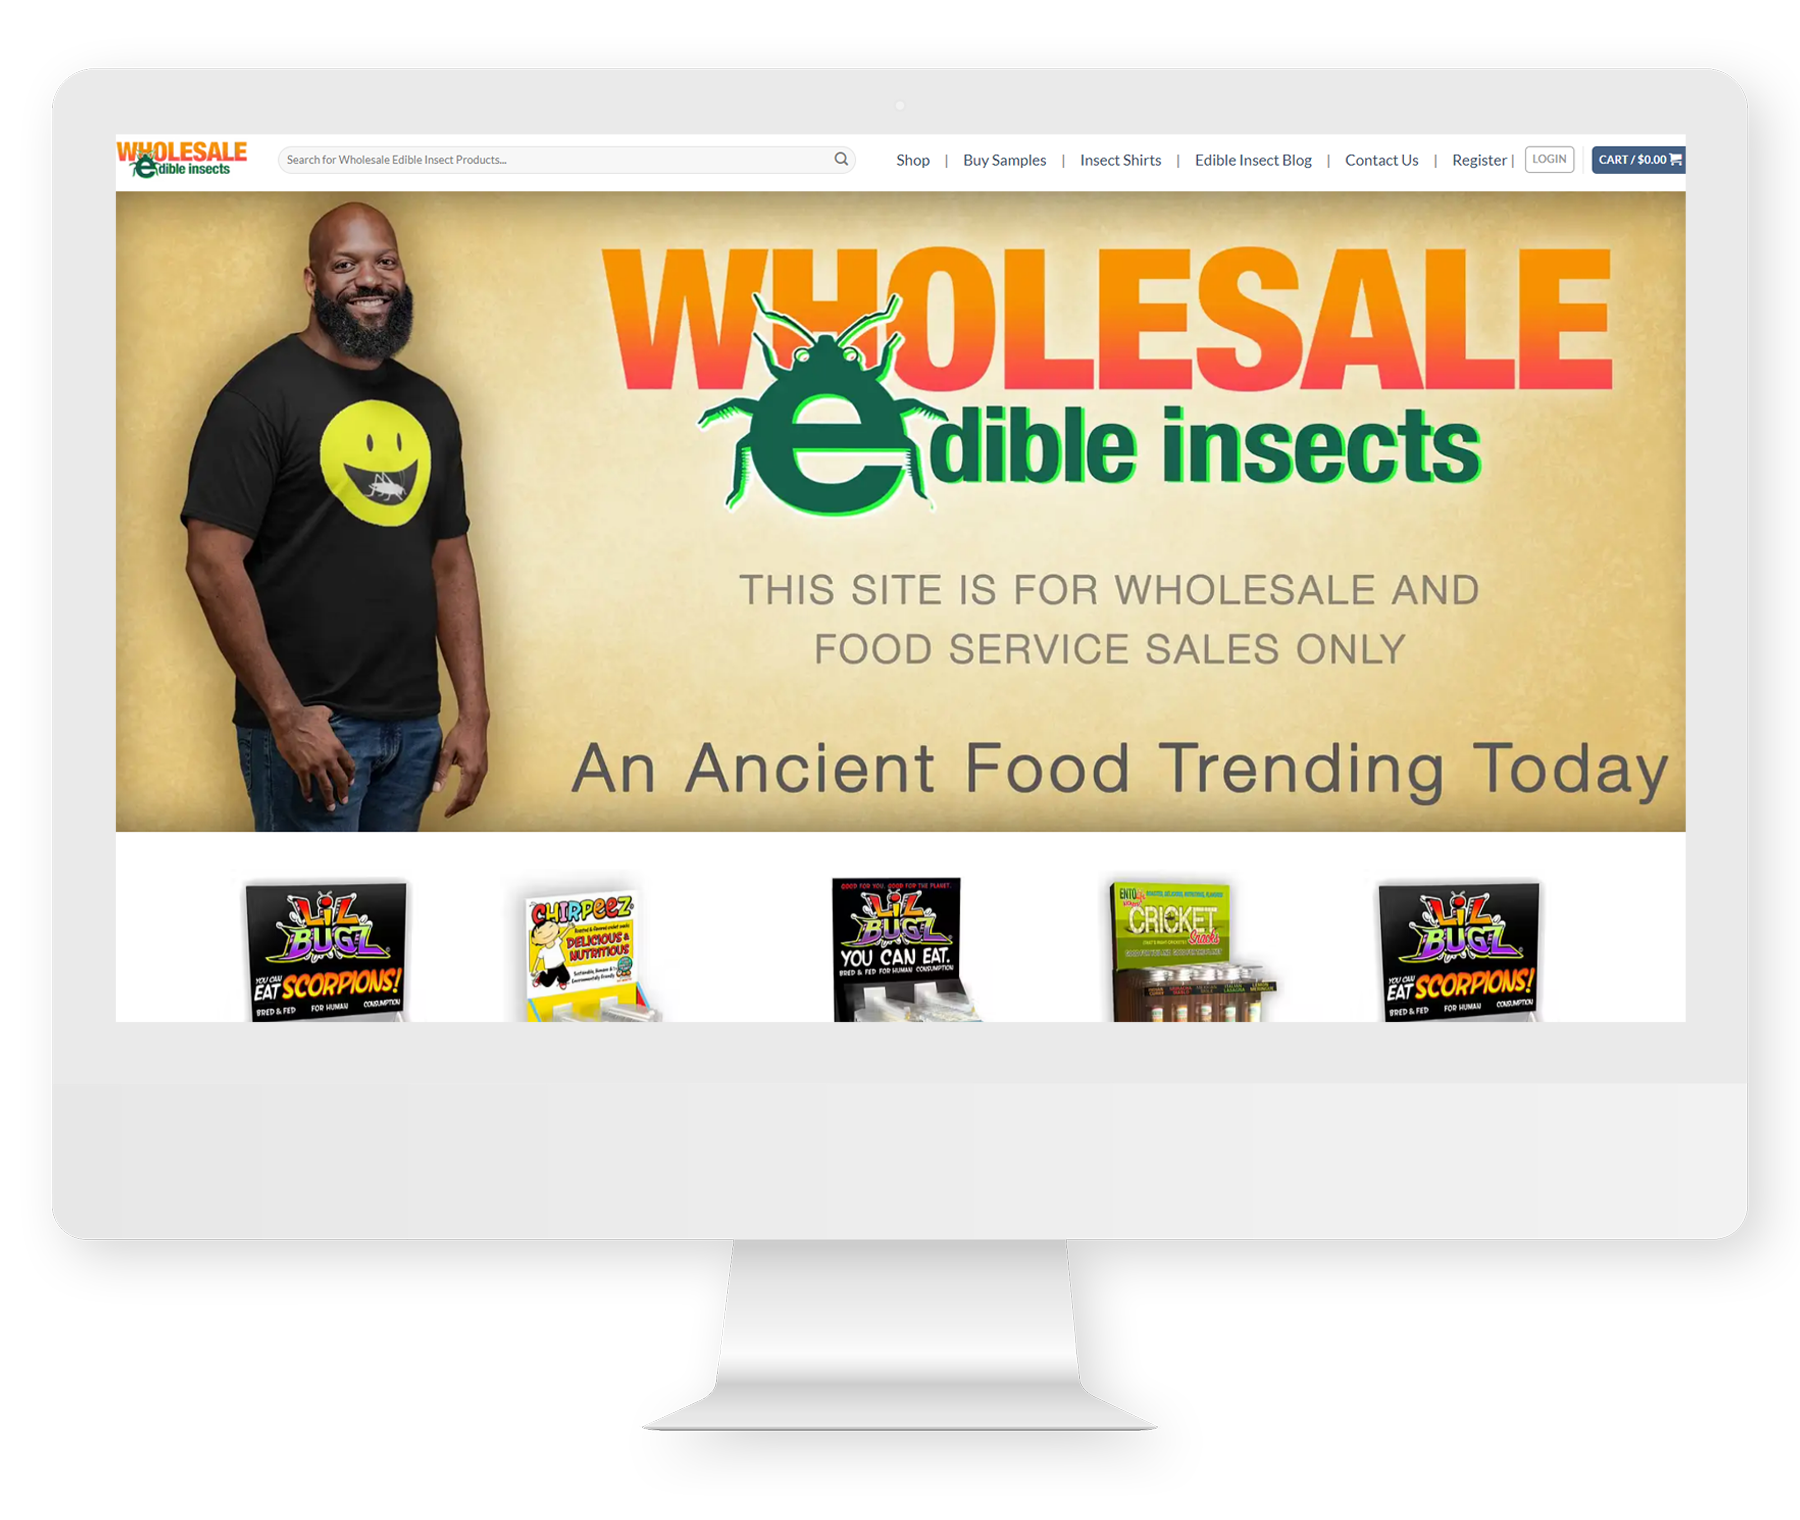 Wholesale Edible Insects